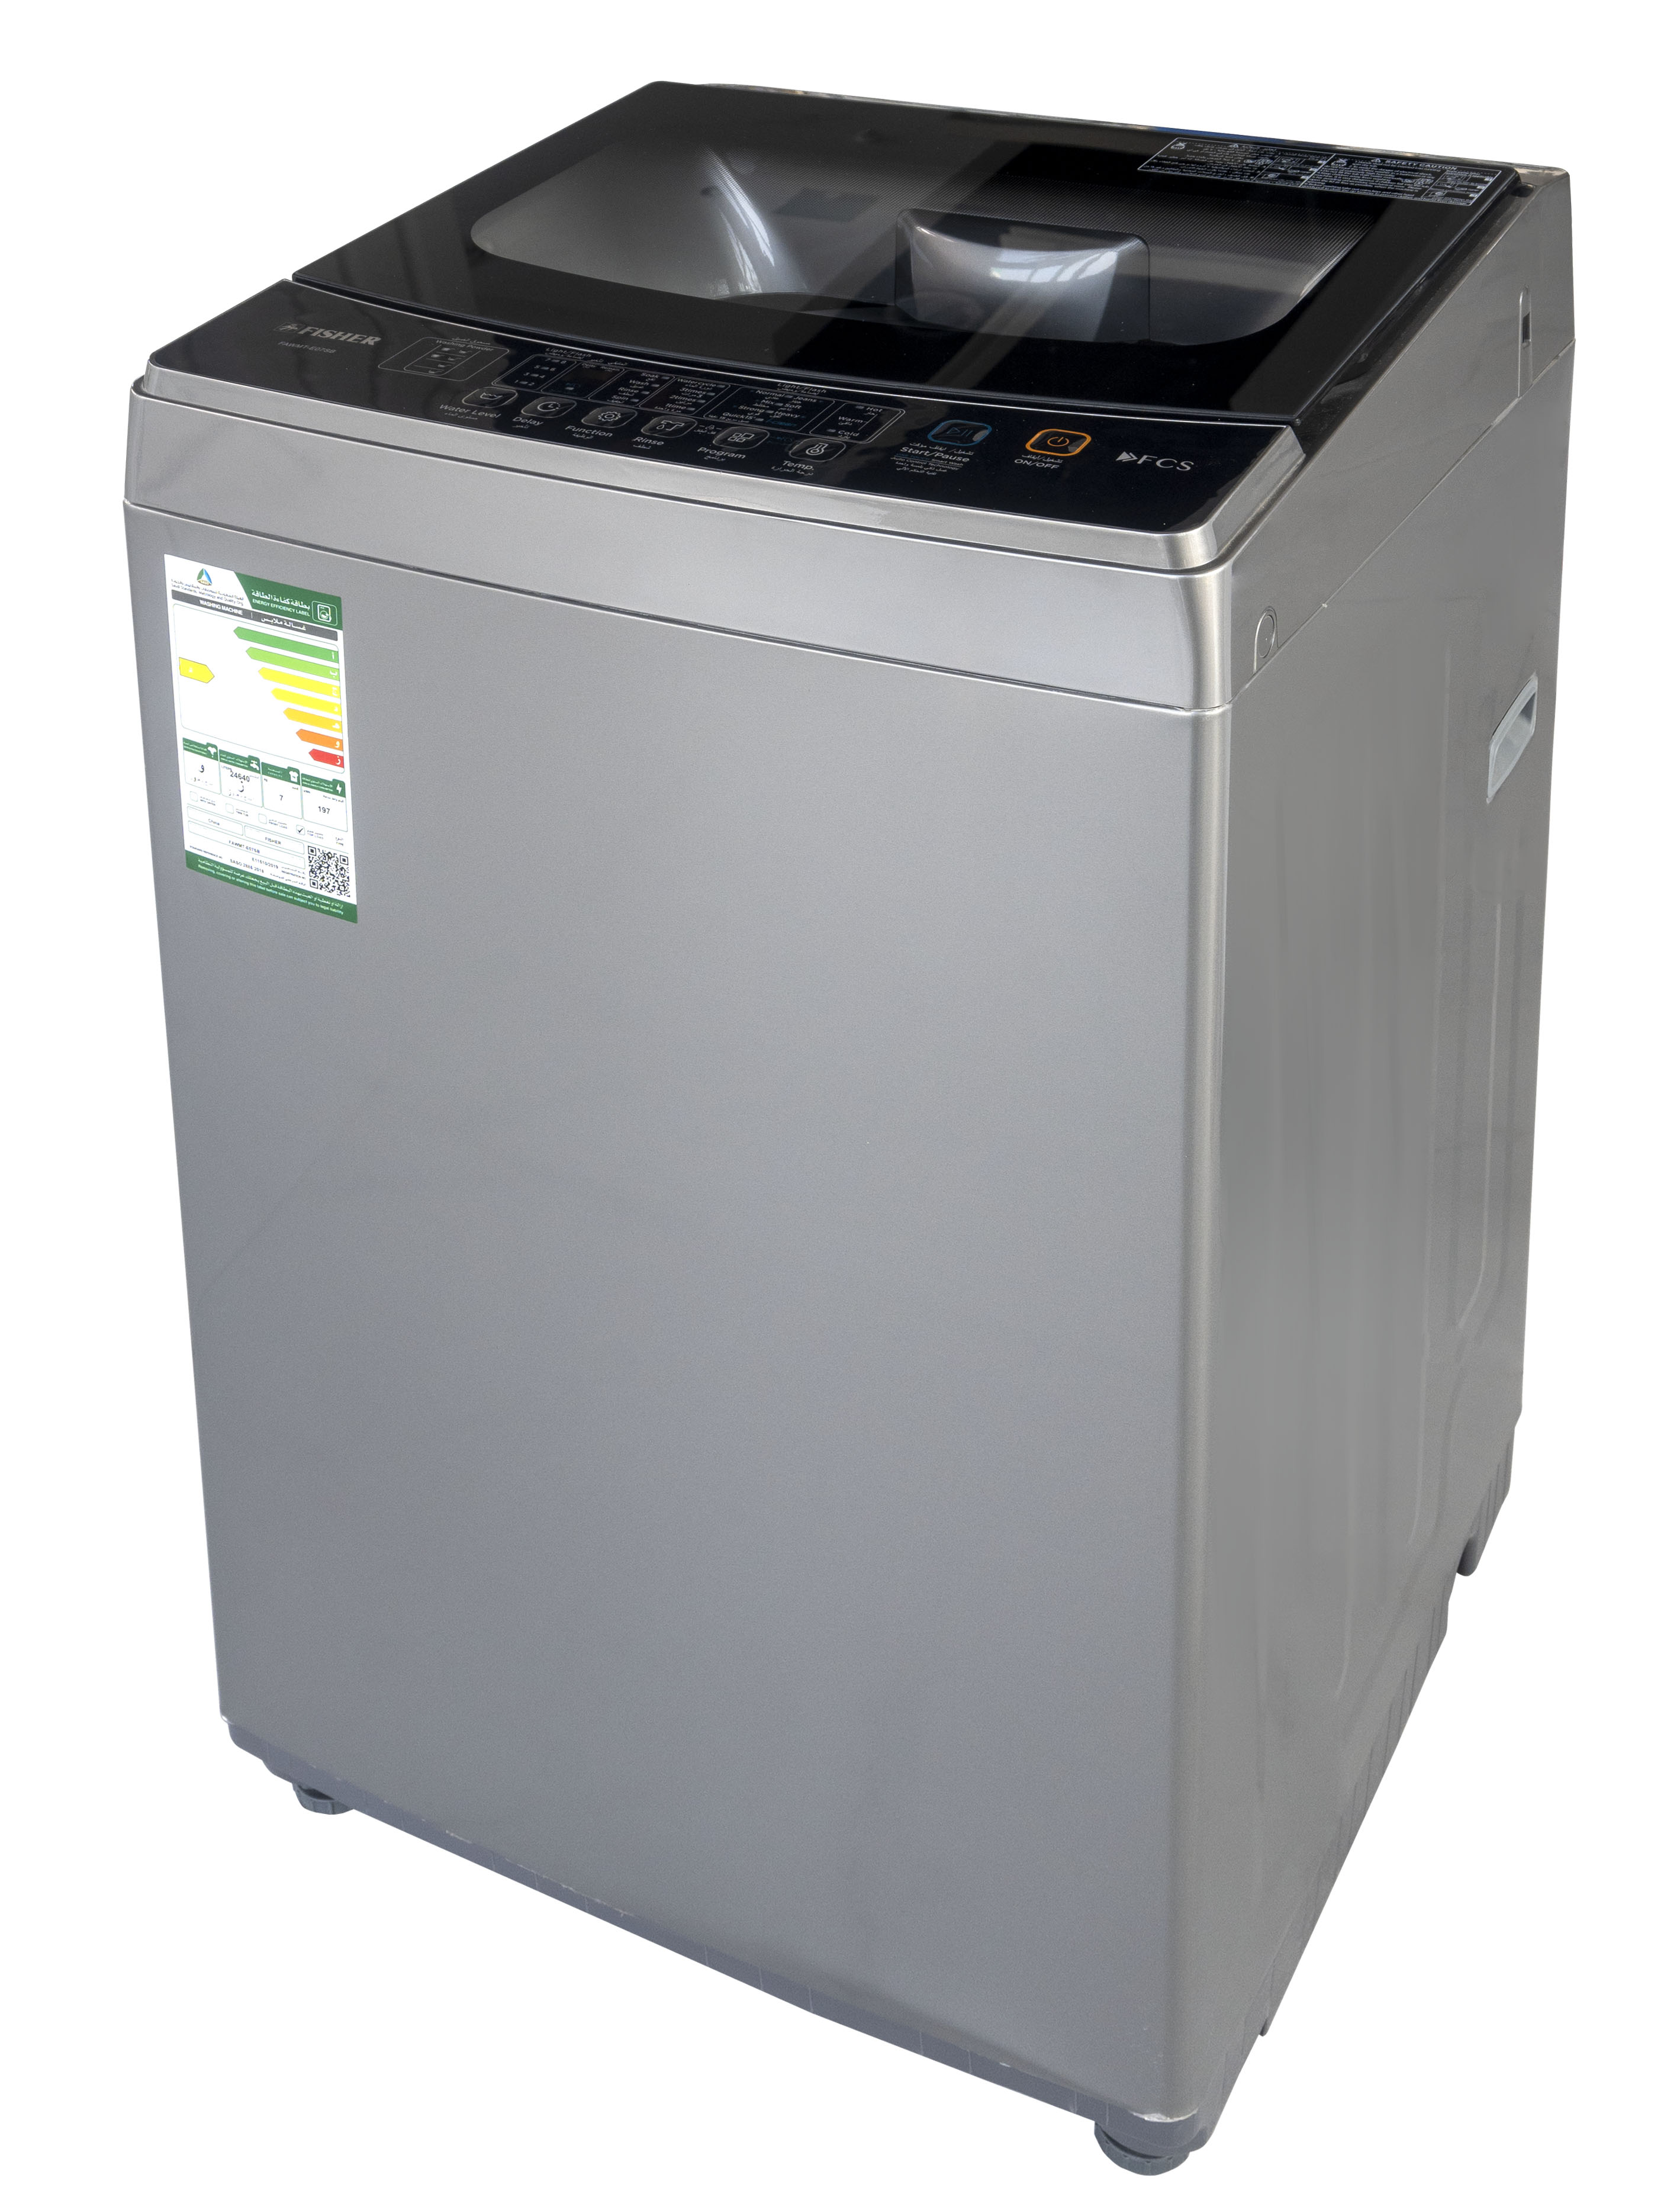 Fisher Auto-Washer Top Load, 7kg, FAWMT-E07SBN (Installation Not Included)